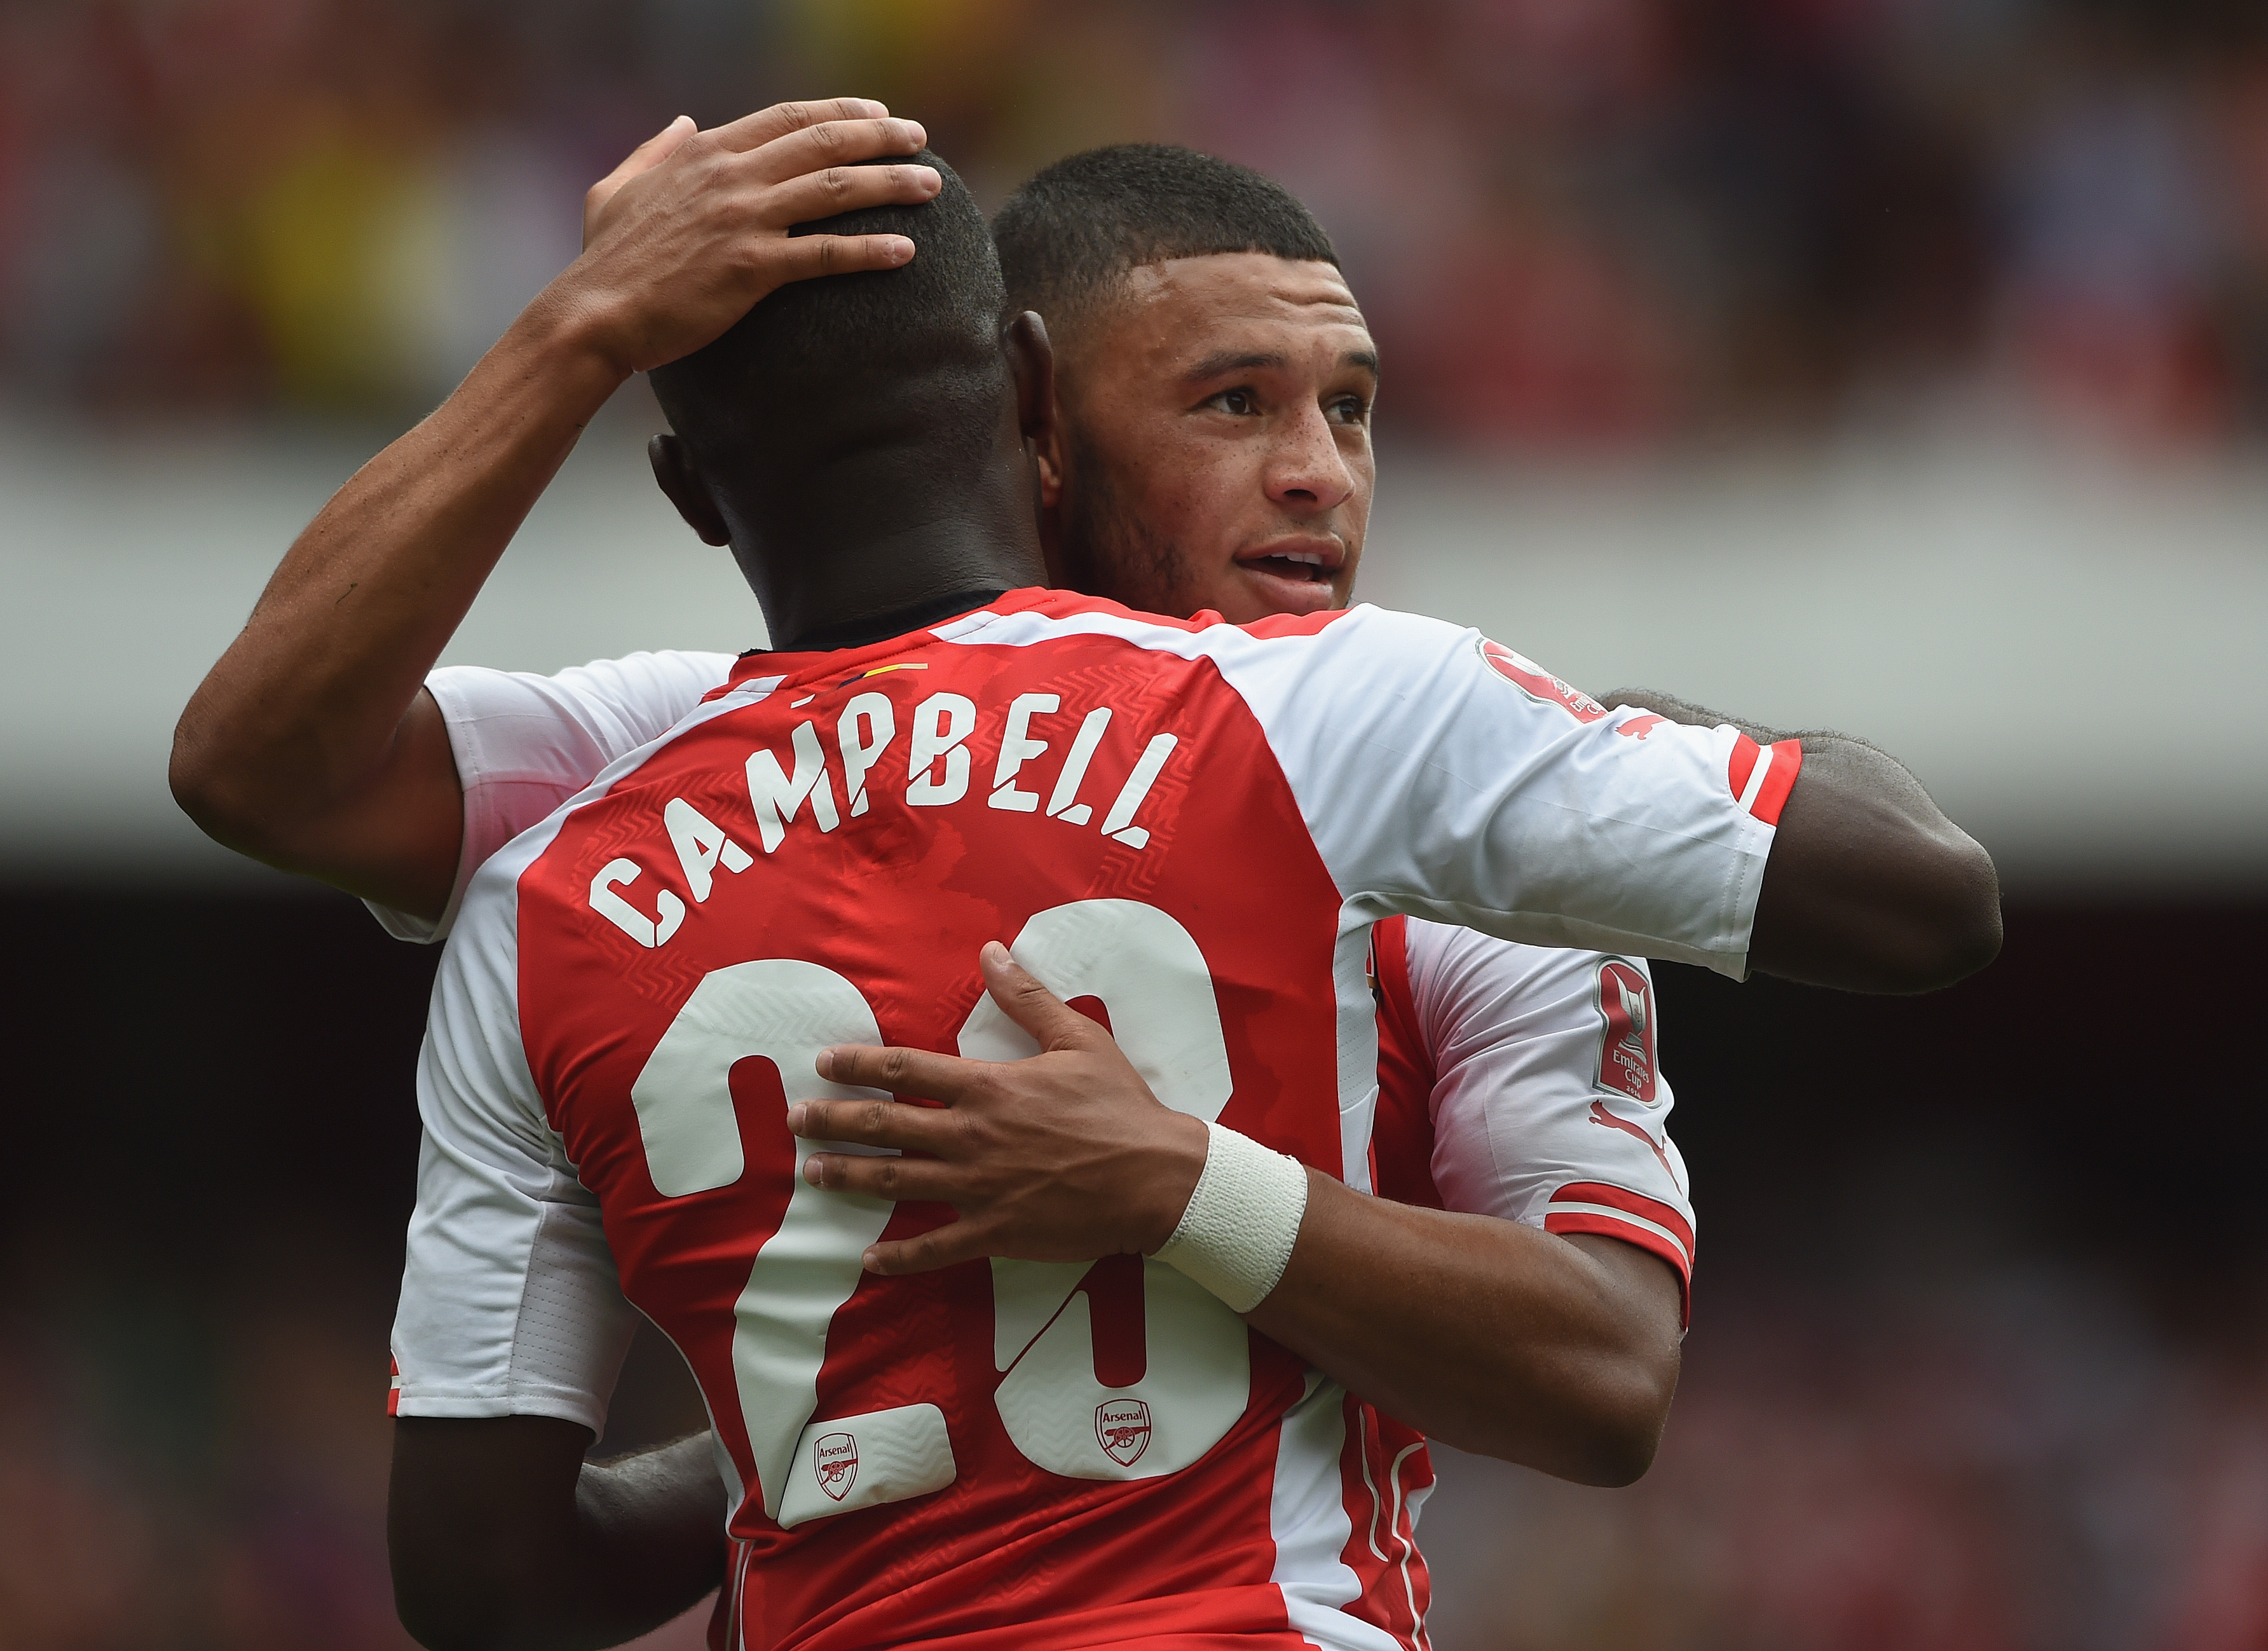 Will either Arsenal reserve impress as a starter this weekend? Will you pick either?